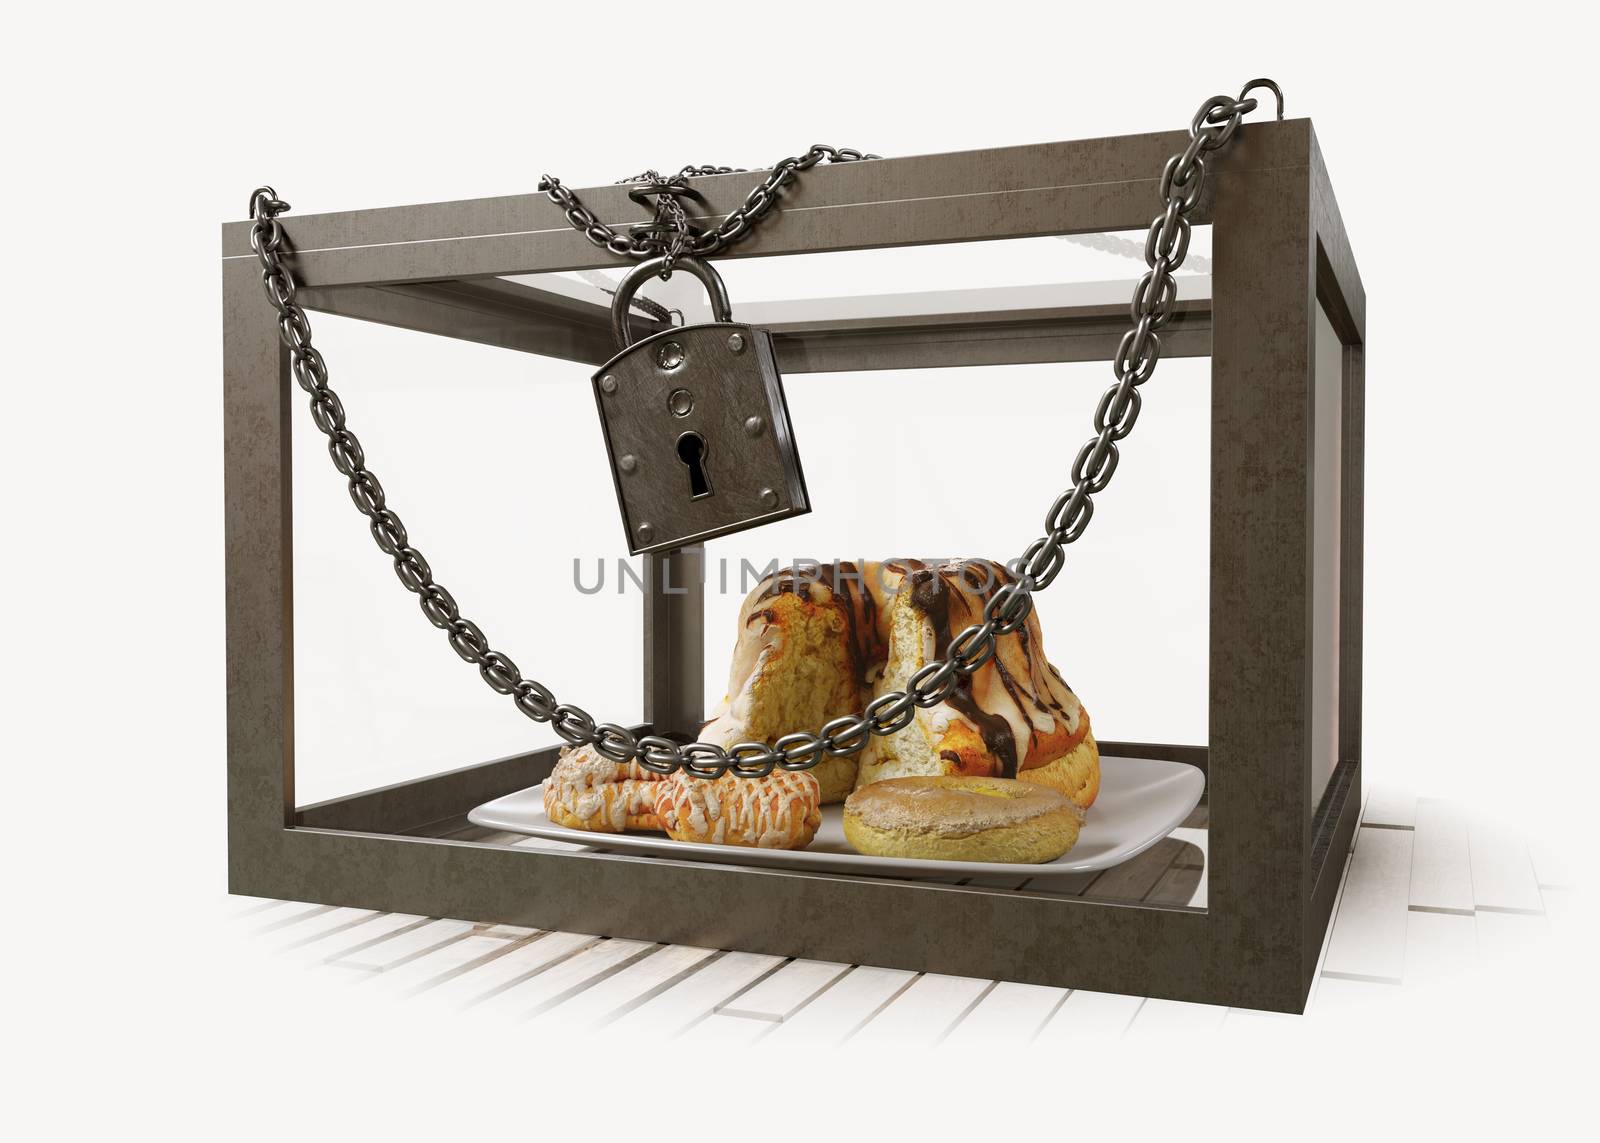 cakes in close metal box with chains diet concept composition photo